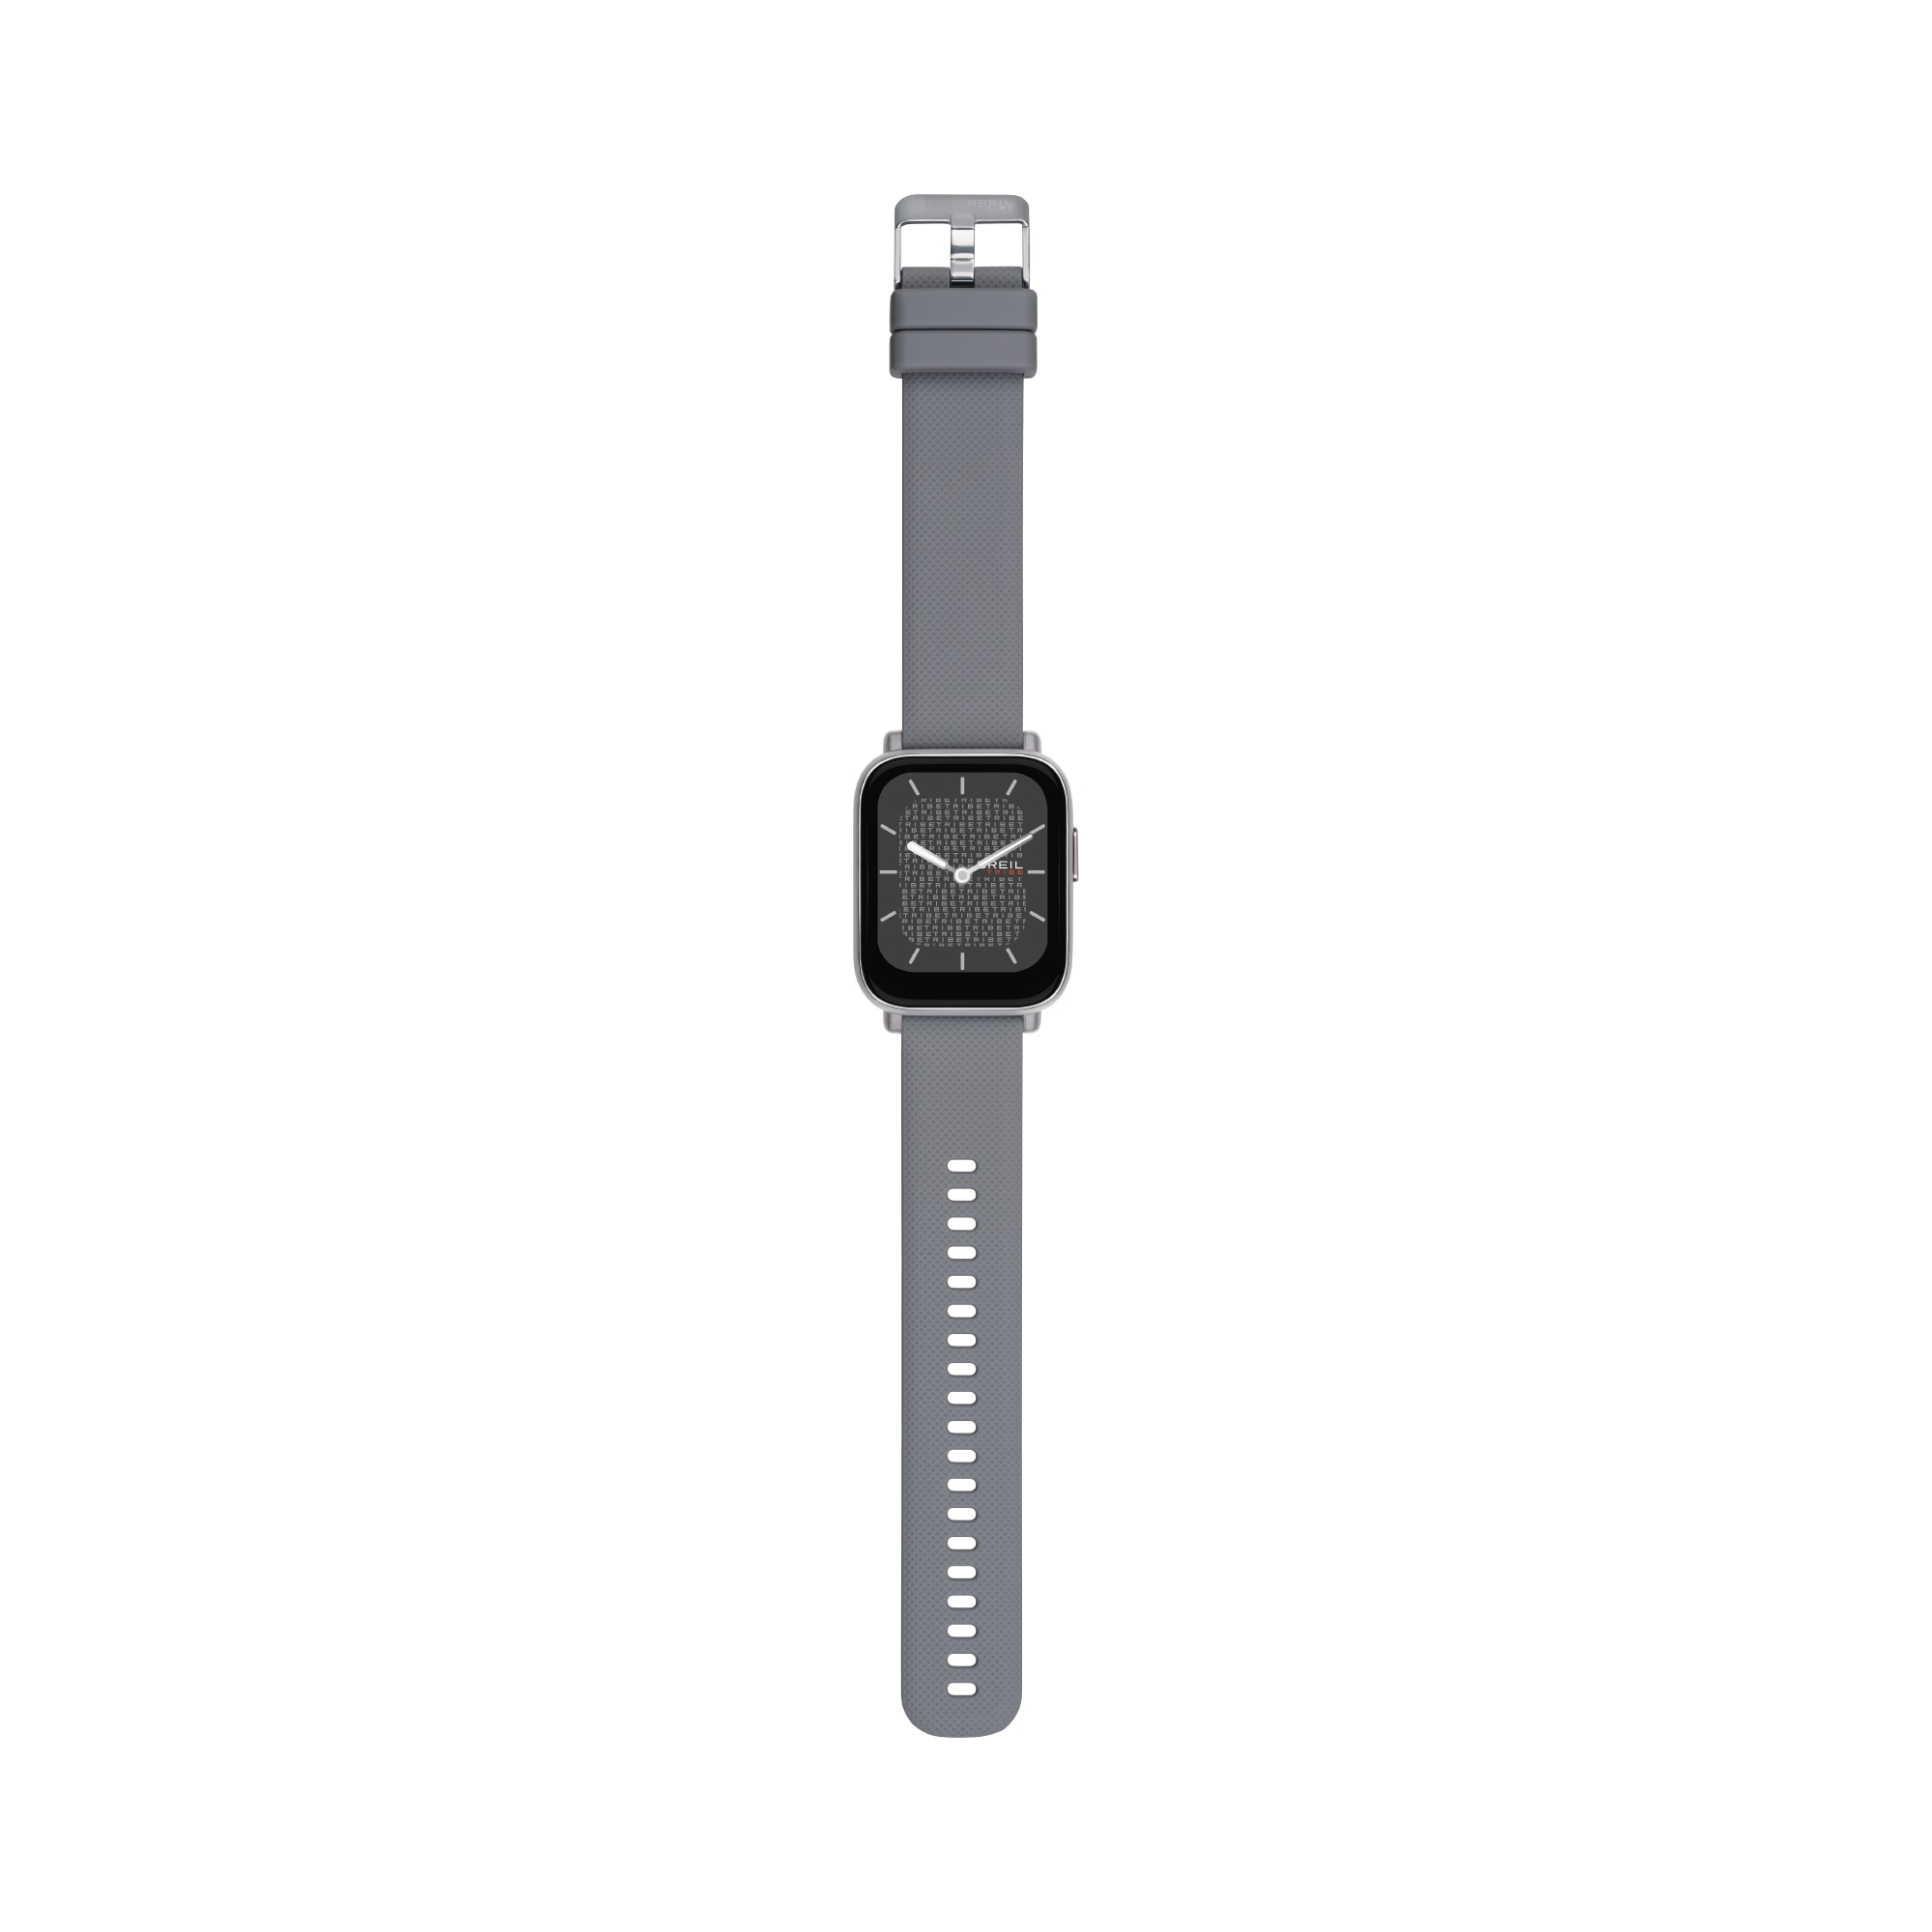 SBT-1 - SMARTWATCH WITH DOUBLE STRAP AND SILVER CASE - 8 - EW0605 | Breil